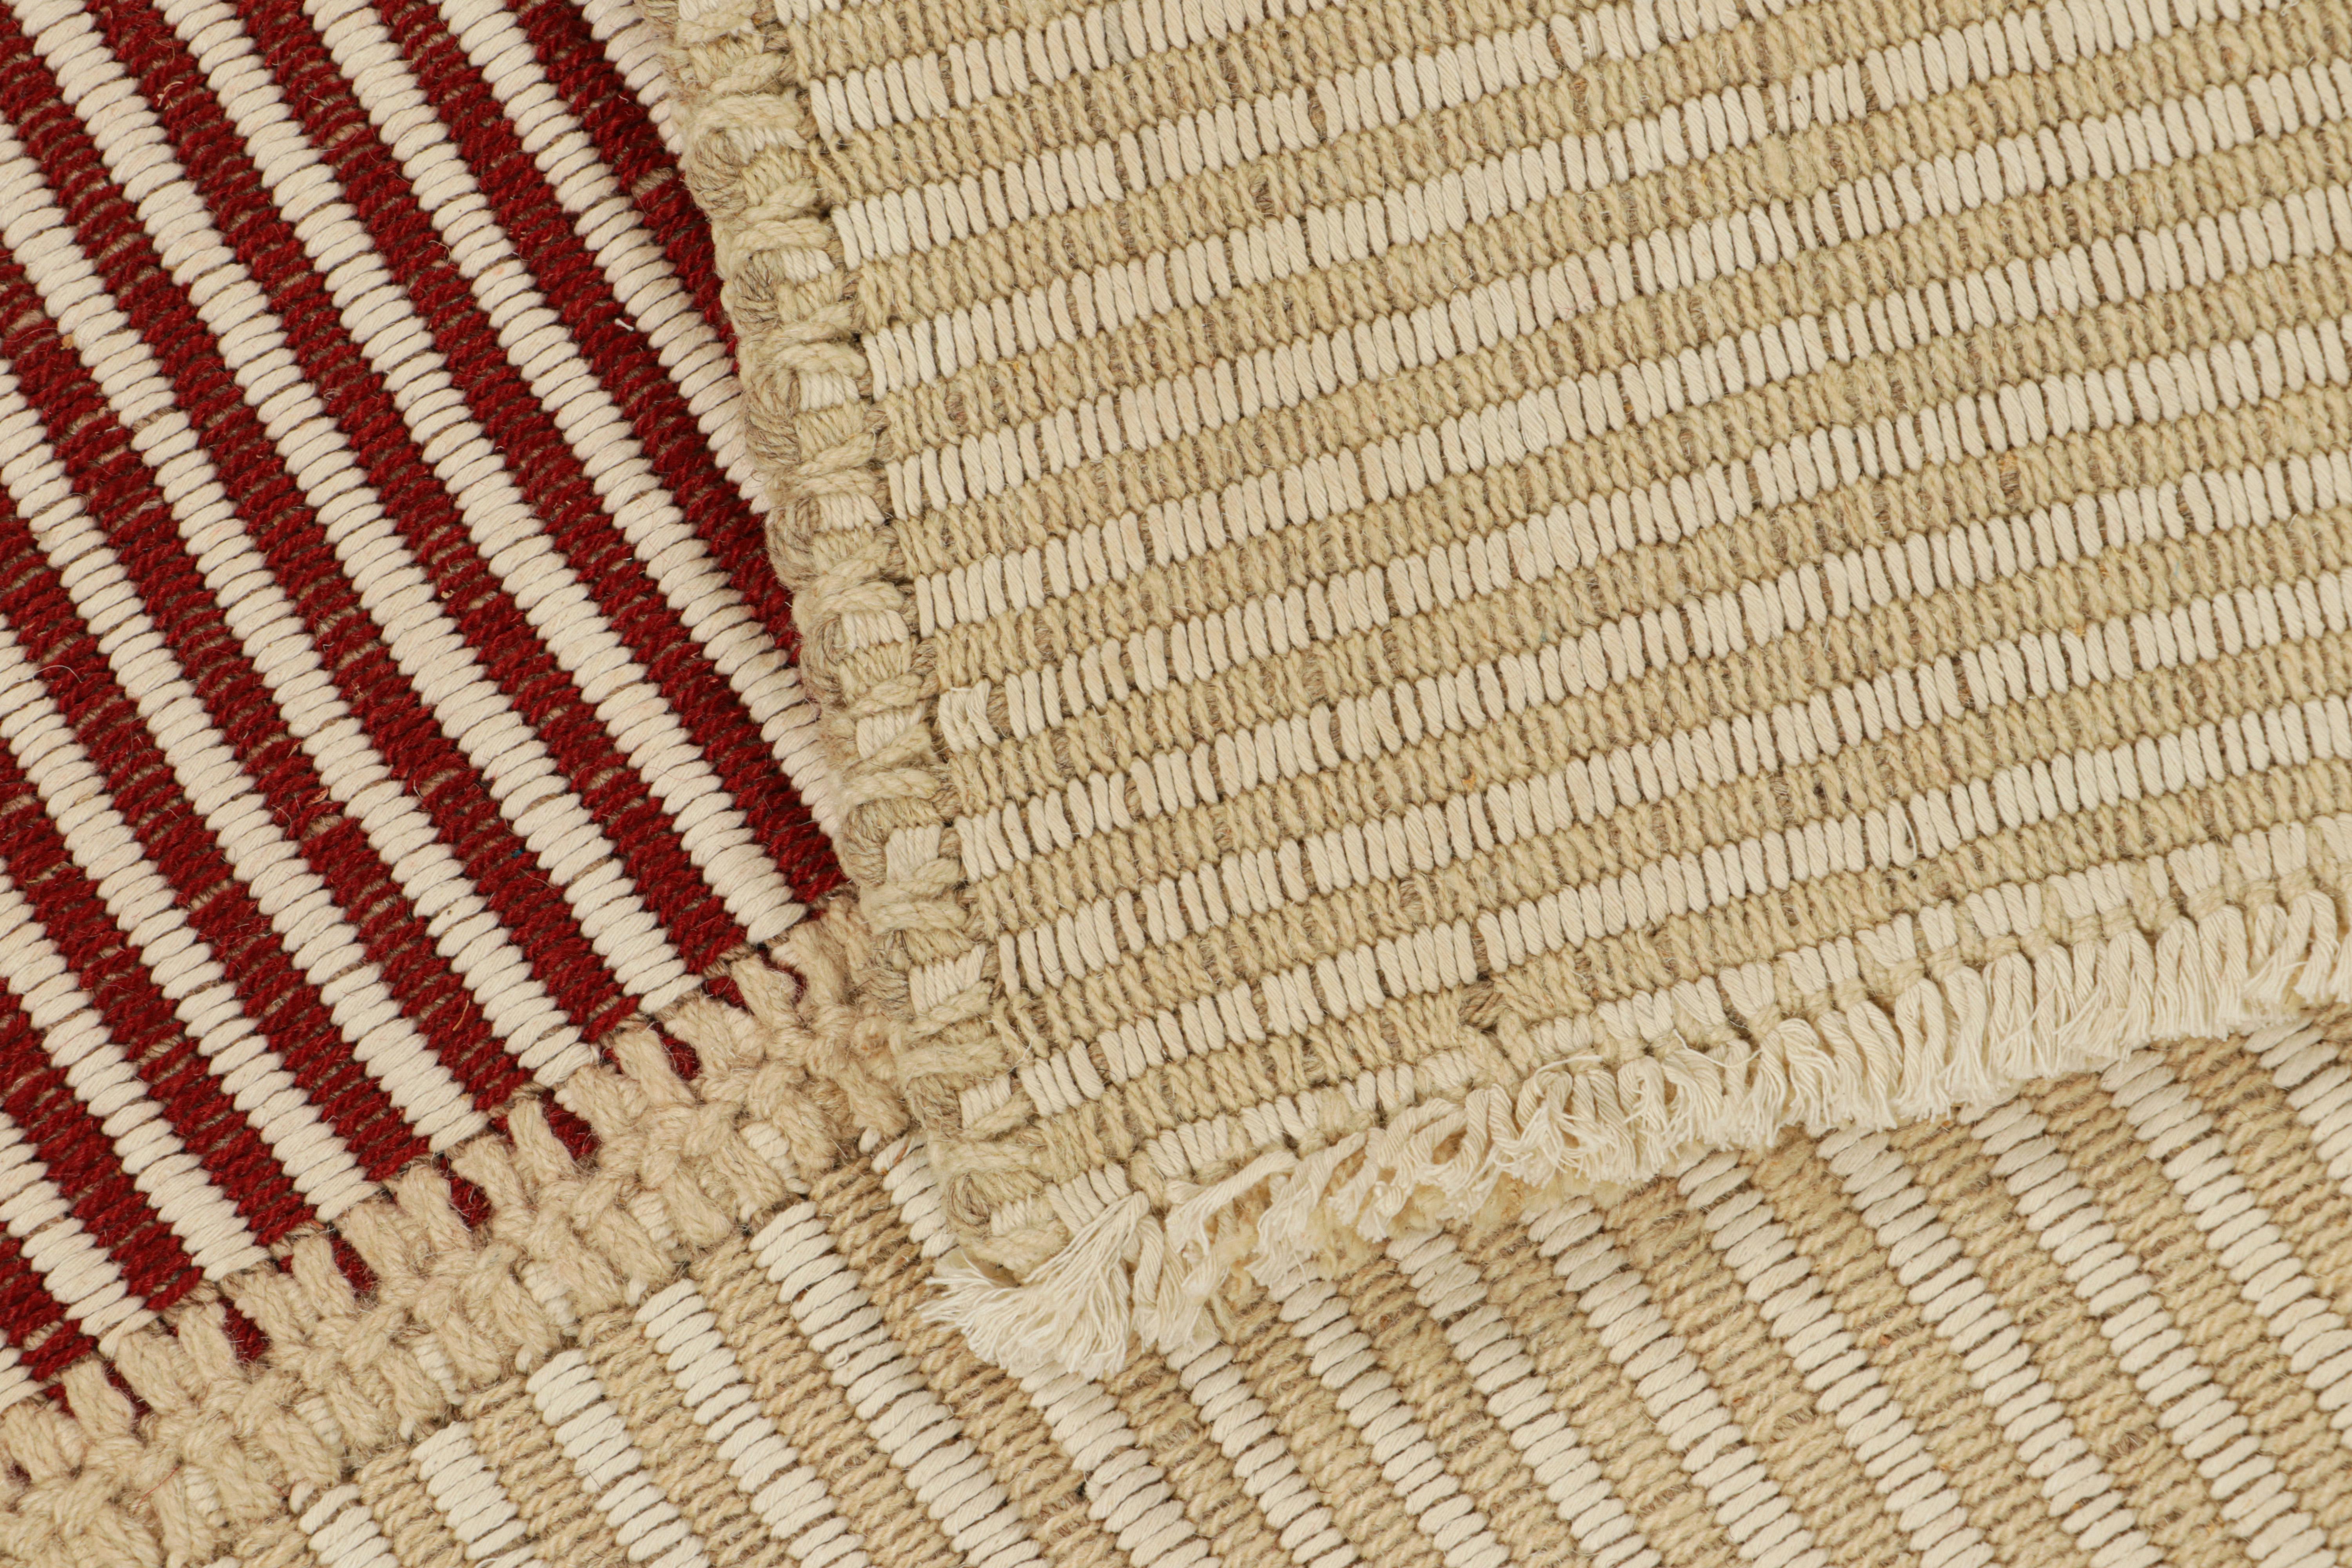 Wool Rug & Kilim’s Contemporary Kilim in Red and Beige Textural Stripes For Sale